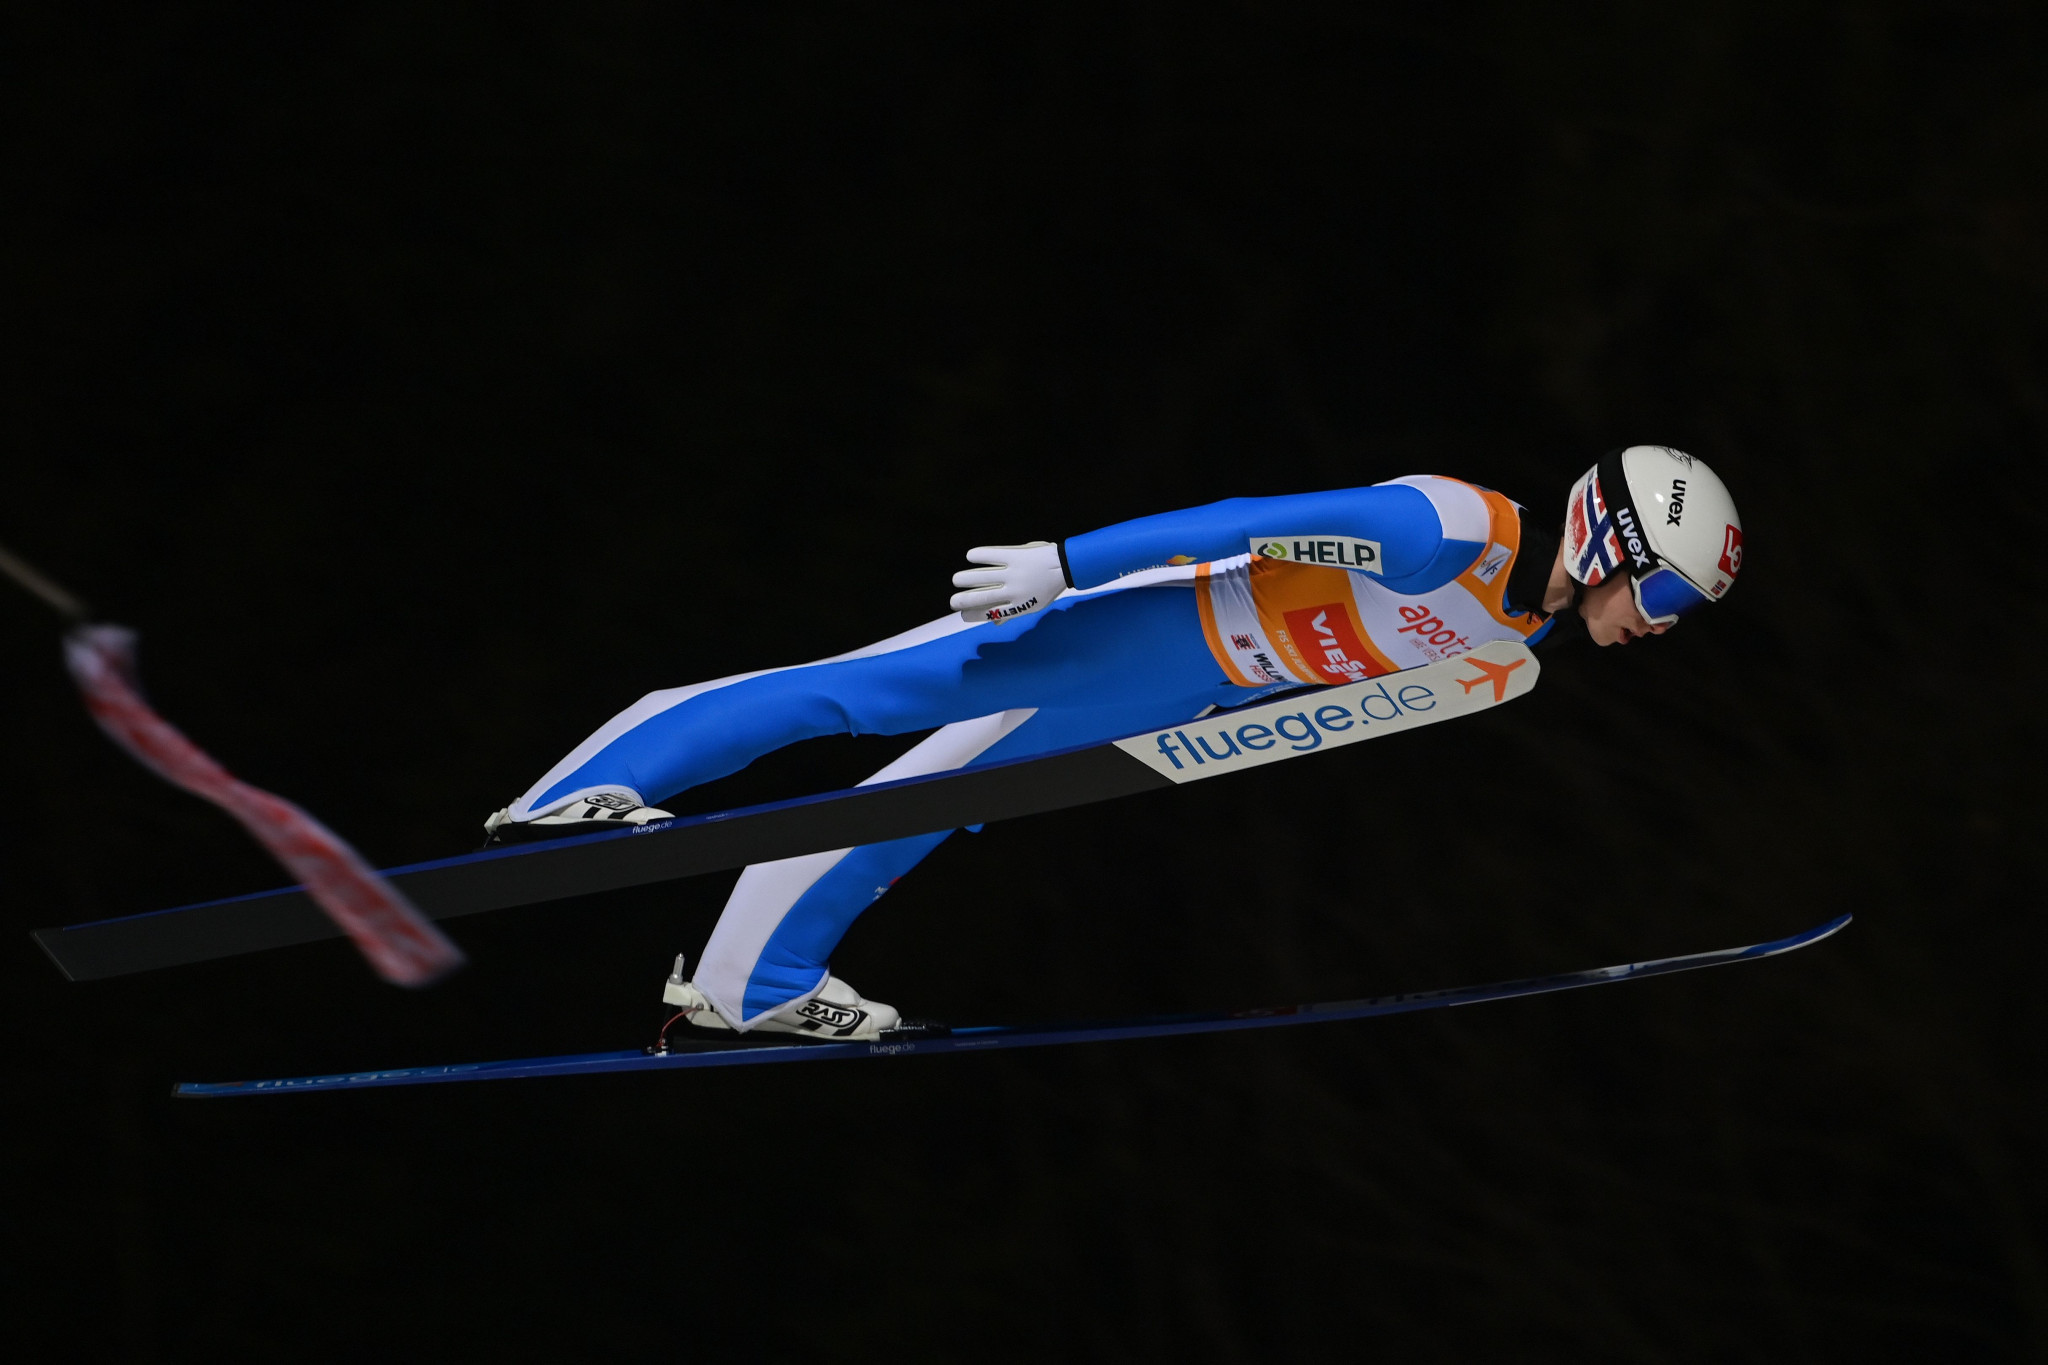 Granerud triumphs again in Willingen as wind impacts FIS Ski Jumping World Cup event